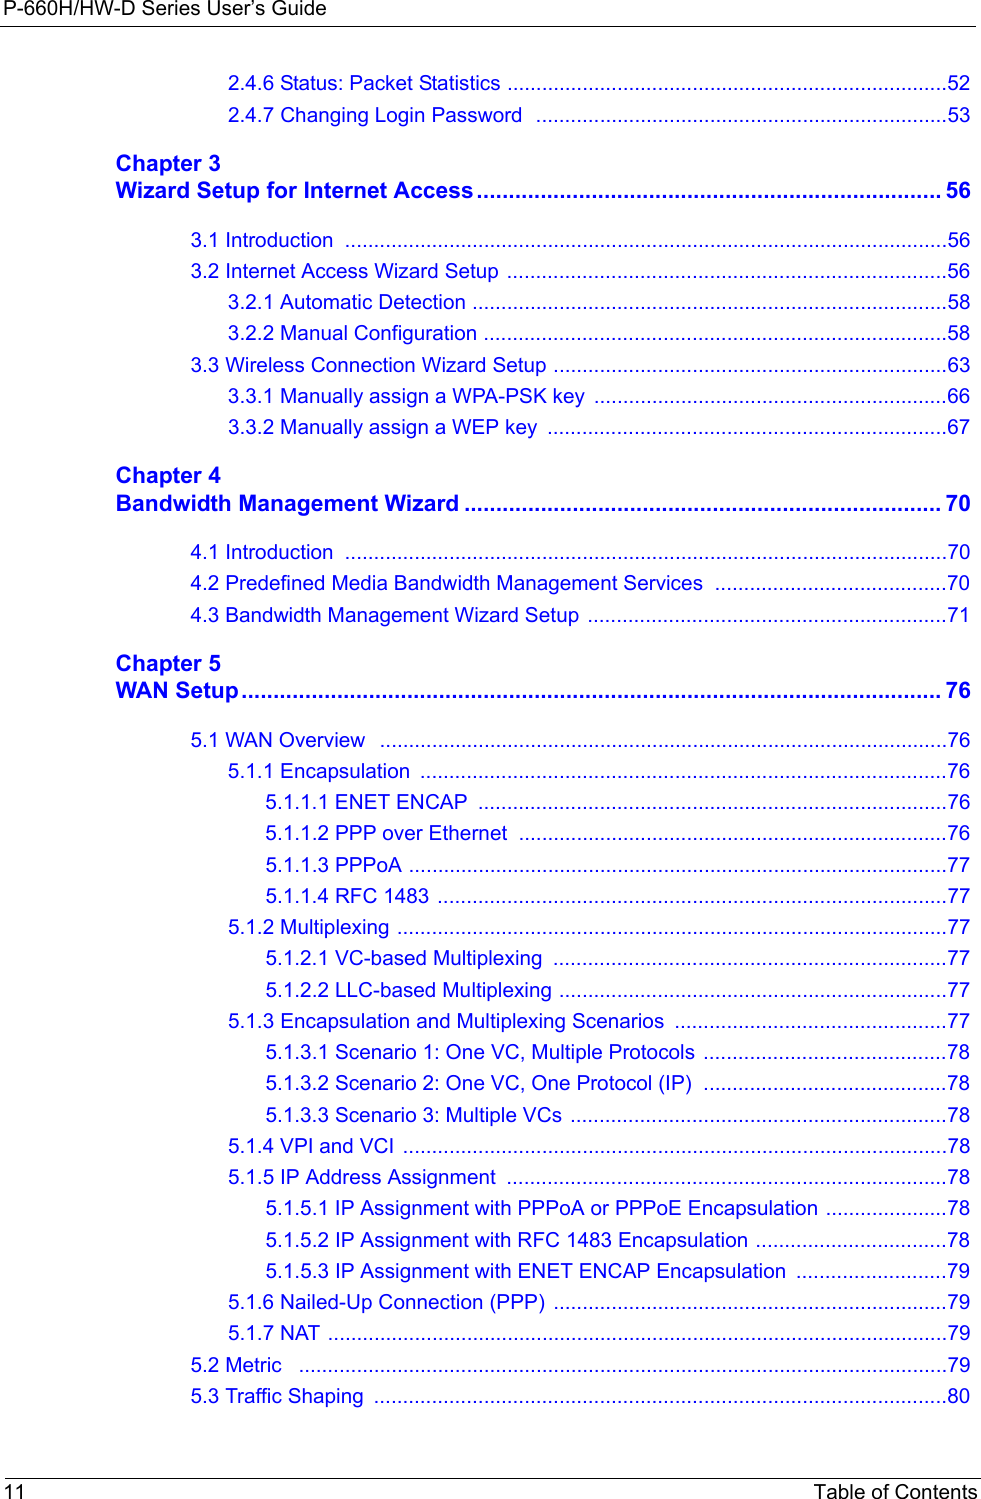 P-660H/HW-D Series User’s Guide11 Table of Contents2.4.6 Status: Packet Statistics ............................................................................522.4.7 Changing Login Password  .......................................................................53Chapter 3Wizard Setup for Internet Access......................................................................... 563.1 Introduction  ........................................................................................................563.2 Internet Access Wizard Setup ............................................................................563.2.1 Automatic Detection ..................................................................................583.2.2 Manual Configuration ................................................................................583.3 Wireless Connection Wizard Setup ....................................................................633.3.1 Manually assign a WPA-PSK key  .............................................................663.3.2 Manually assign a WEP key  .....................................................................67Chapter 4Bandwidth Management Wizard ........................................................................... 704.1 Introduction  ........................................................................................................704.2 Predefined Media Bandwidth Management Services  ........................................704.3 Bandwidth Management Wizard Setup  ..............................................................71Chapter 5WAN Setup.............................................................................................................. 765.1 WAN Overview   ..................................................................................................765.1.1 Encapsulation  ...........................................................................................765.1.1.1 ENET ENCAP  .................................................................................765.1.1.2 PPP over Ethernet  ..........................................................................765.1.1.3 PPPoA .............................................................................................775.1.1.4 RFC 1483 ........................................................................................775.1.2 Multiplexing ...............................................................................................775.1.2.1 VC-based Multiplexing  ....................................................................775.1.2.2 LLC-based Multiplexing ...................................................................775.1.3 Encapsulation and Multiplexing Scenarios  ...............................................775.1.3.1 Scenario 1: One VC, Multiple Protocols ..........................................785.1.3.2 Scenario 2: One VC, One Protocol (IP)  ..........................................785.1.3.3 Scenario 3: Multiple VCs  .................................................................785.1.4 VPI and VCI  ..............................................................................................785.1.5 IP Address Assignment  ............................................................................785.1.5.1 IP Assignment with PPPoA or PPPoE Encapsulation .....................785.1.5.2 IP Assignment with RFC 1483 Encapsulation .................................785.1.5.3 IP Assignment with ENET ENCAP Encapsulation  ..........................795.1.6 Nailed-Up Connection (PPP) ....................................................................795.1.7 NAT ...........................................................................................................795.2 Metric   ................................................................................................................795.3 Traffic Shaping  ...................................................................................................80